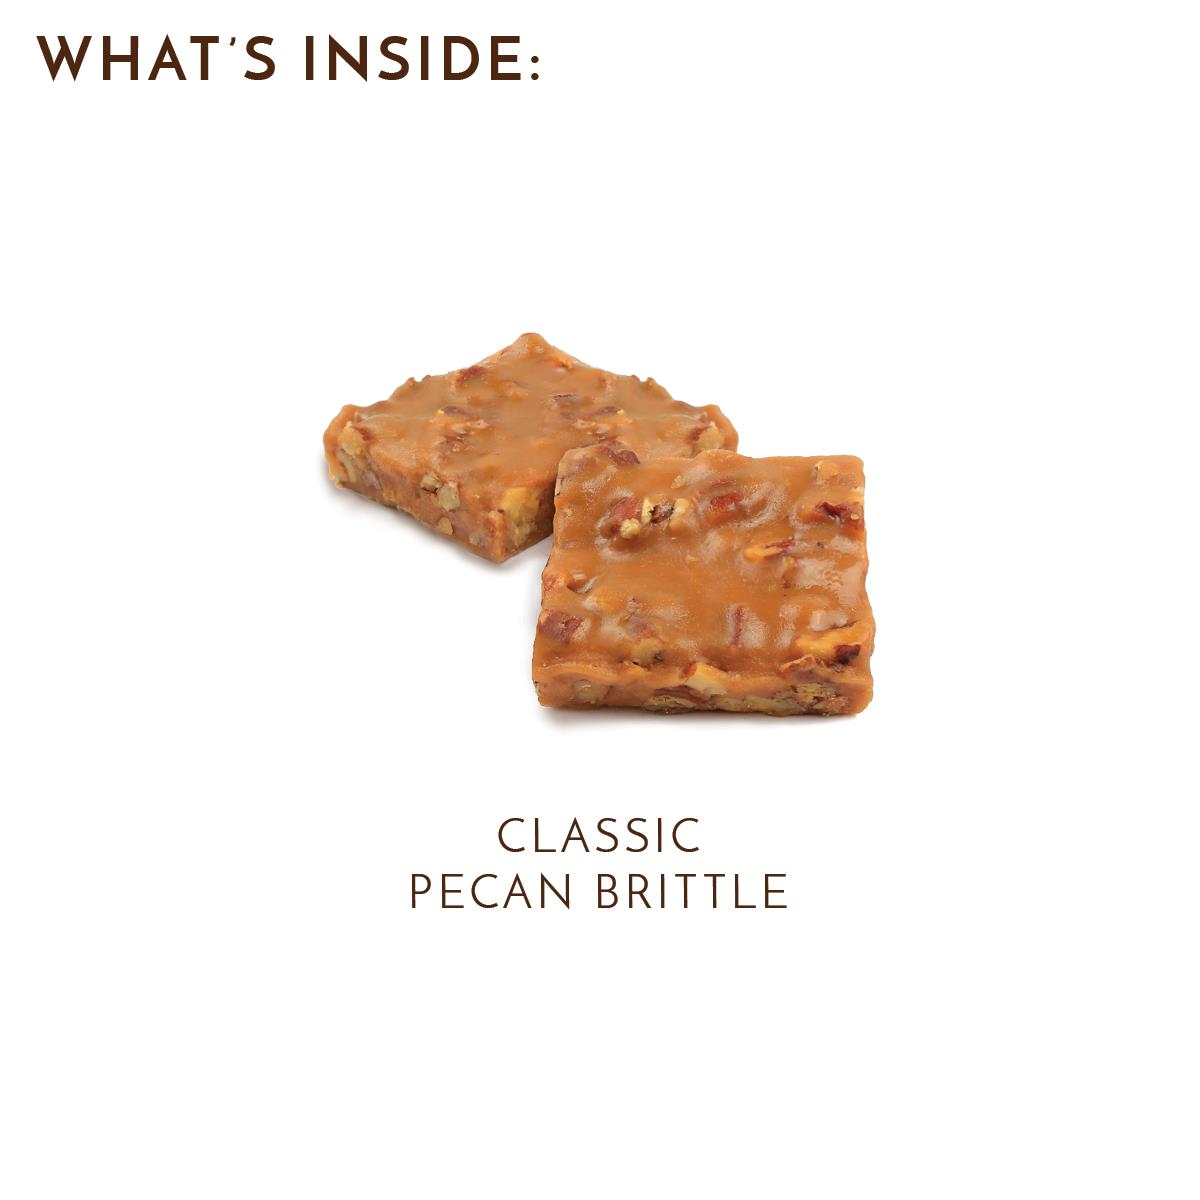 Enjoy and Savor Ethel M Chocolates Most Favorite Crunchy, Buttery Classic Pecan Brittles.